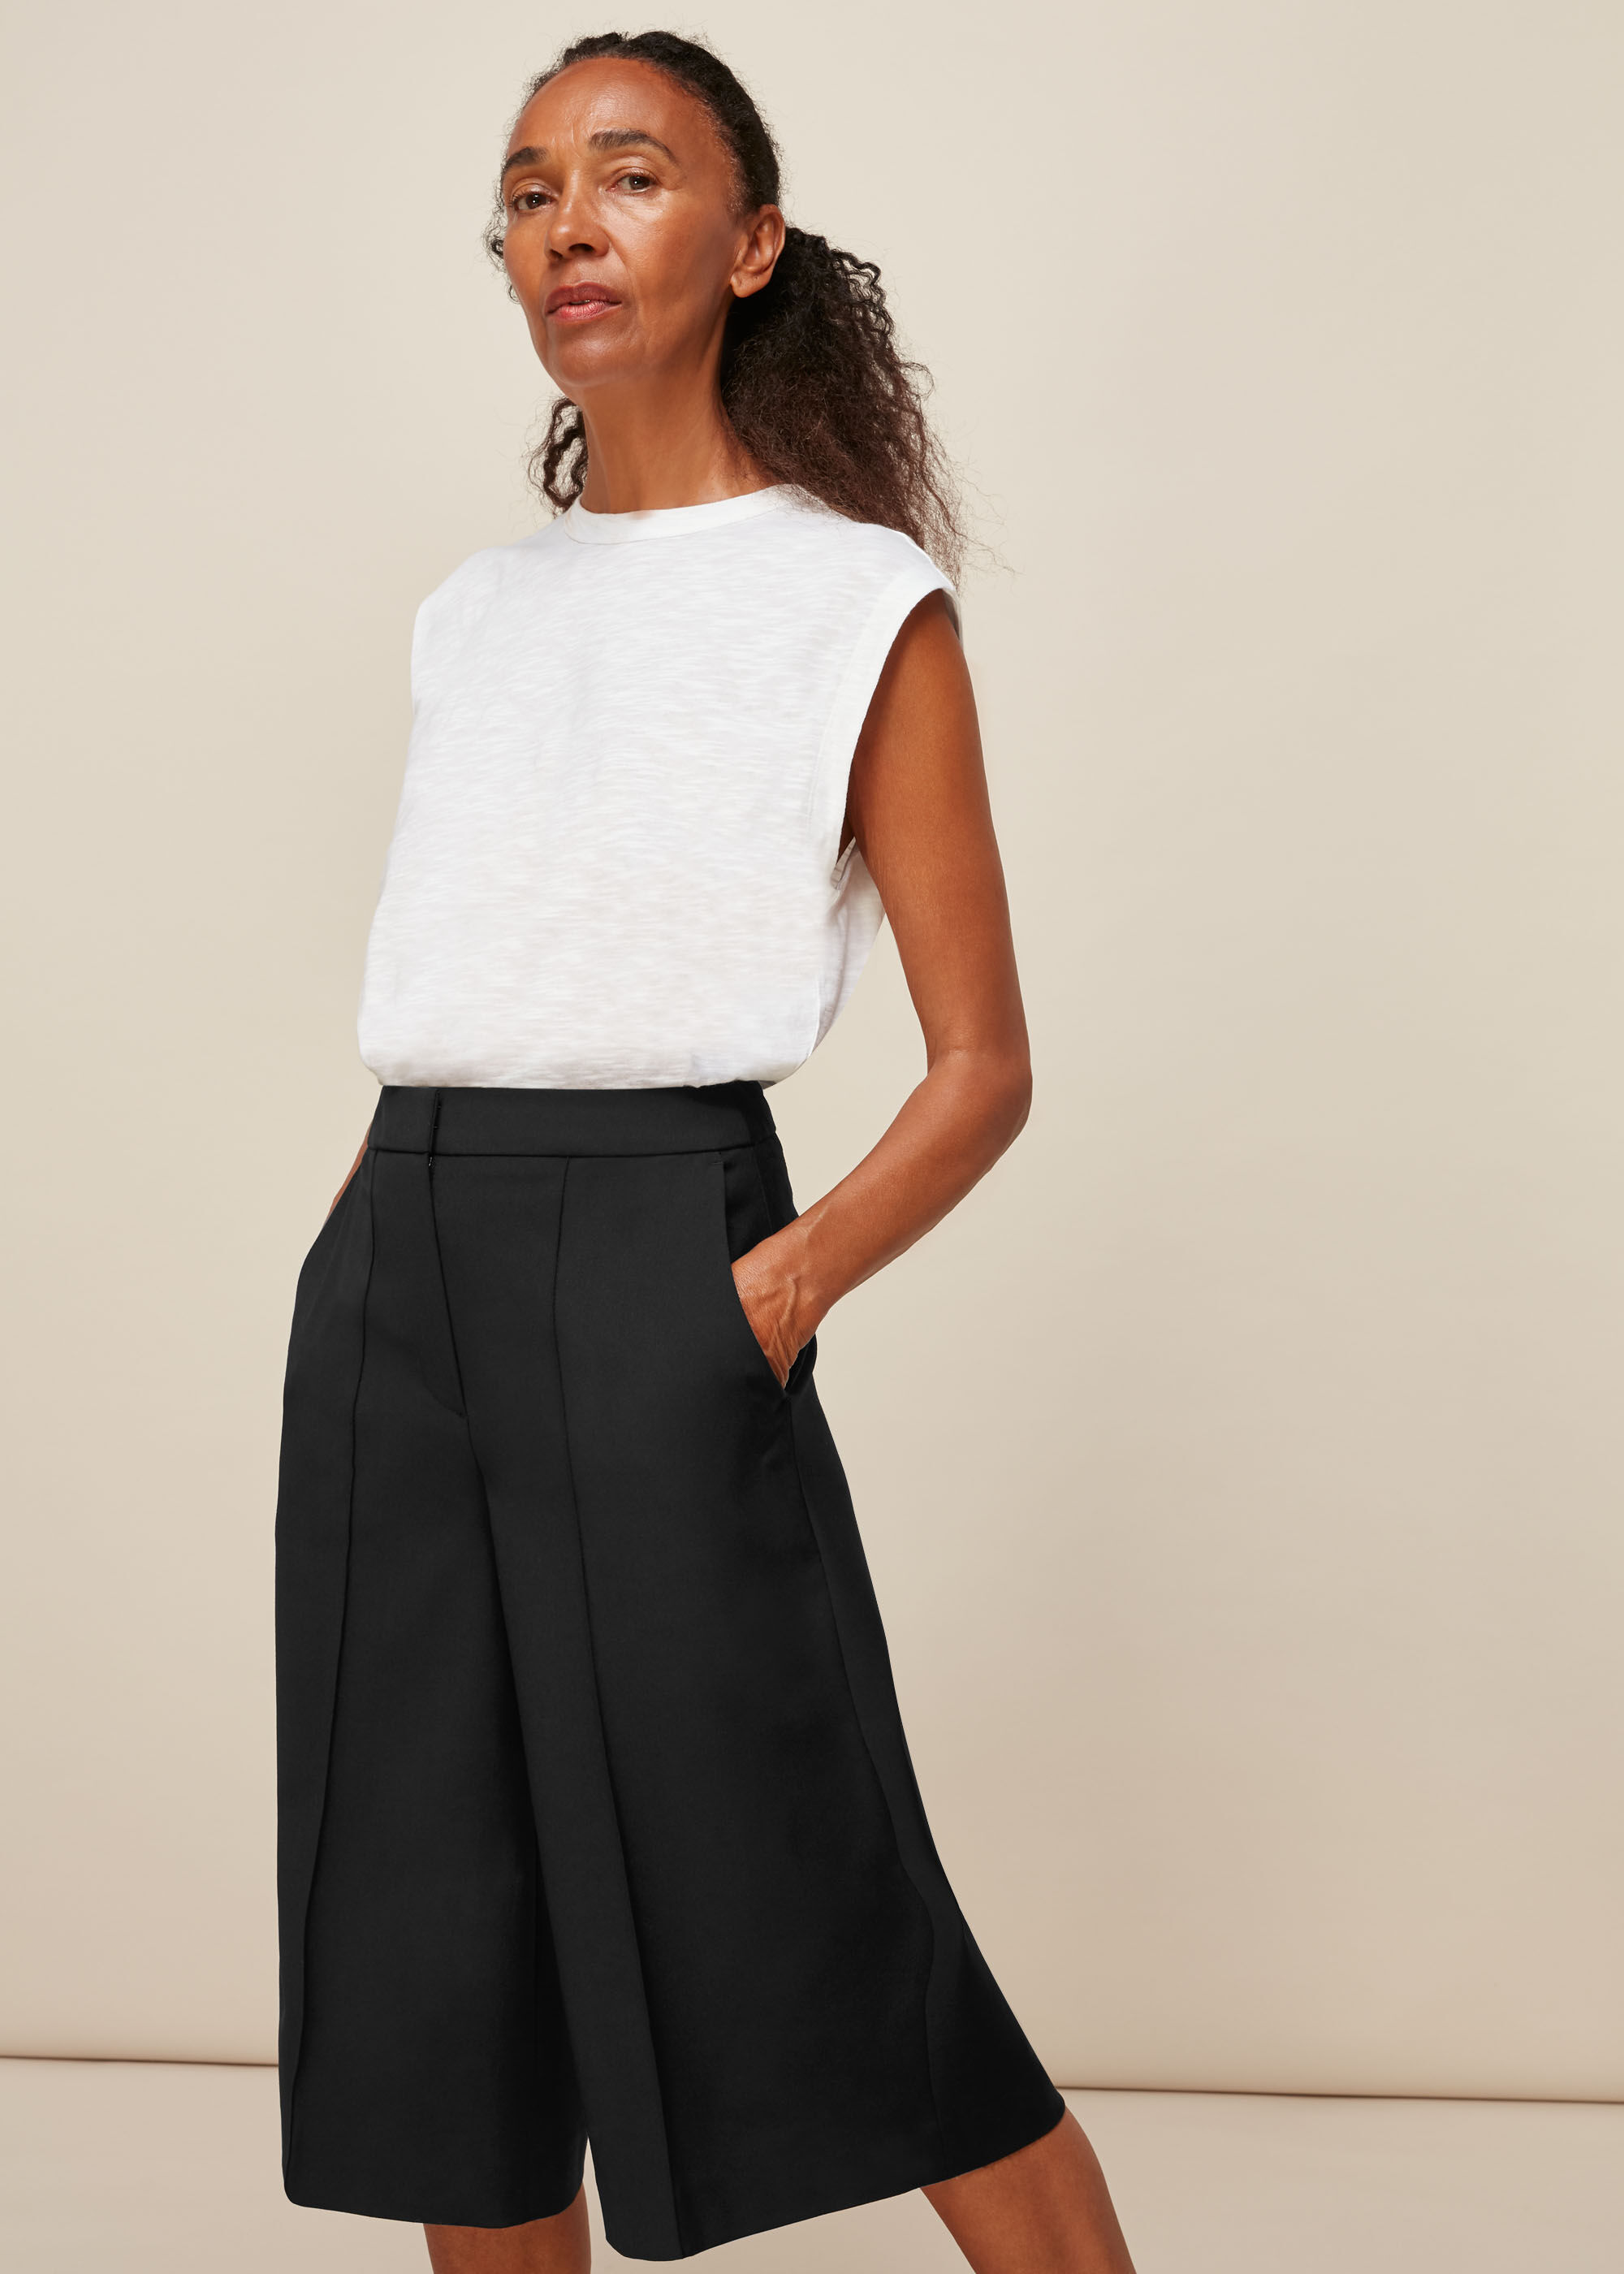 Womens Black Trousers  HighWaisted and Cropped  HM IN